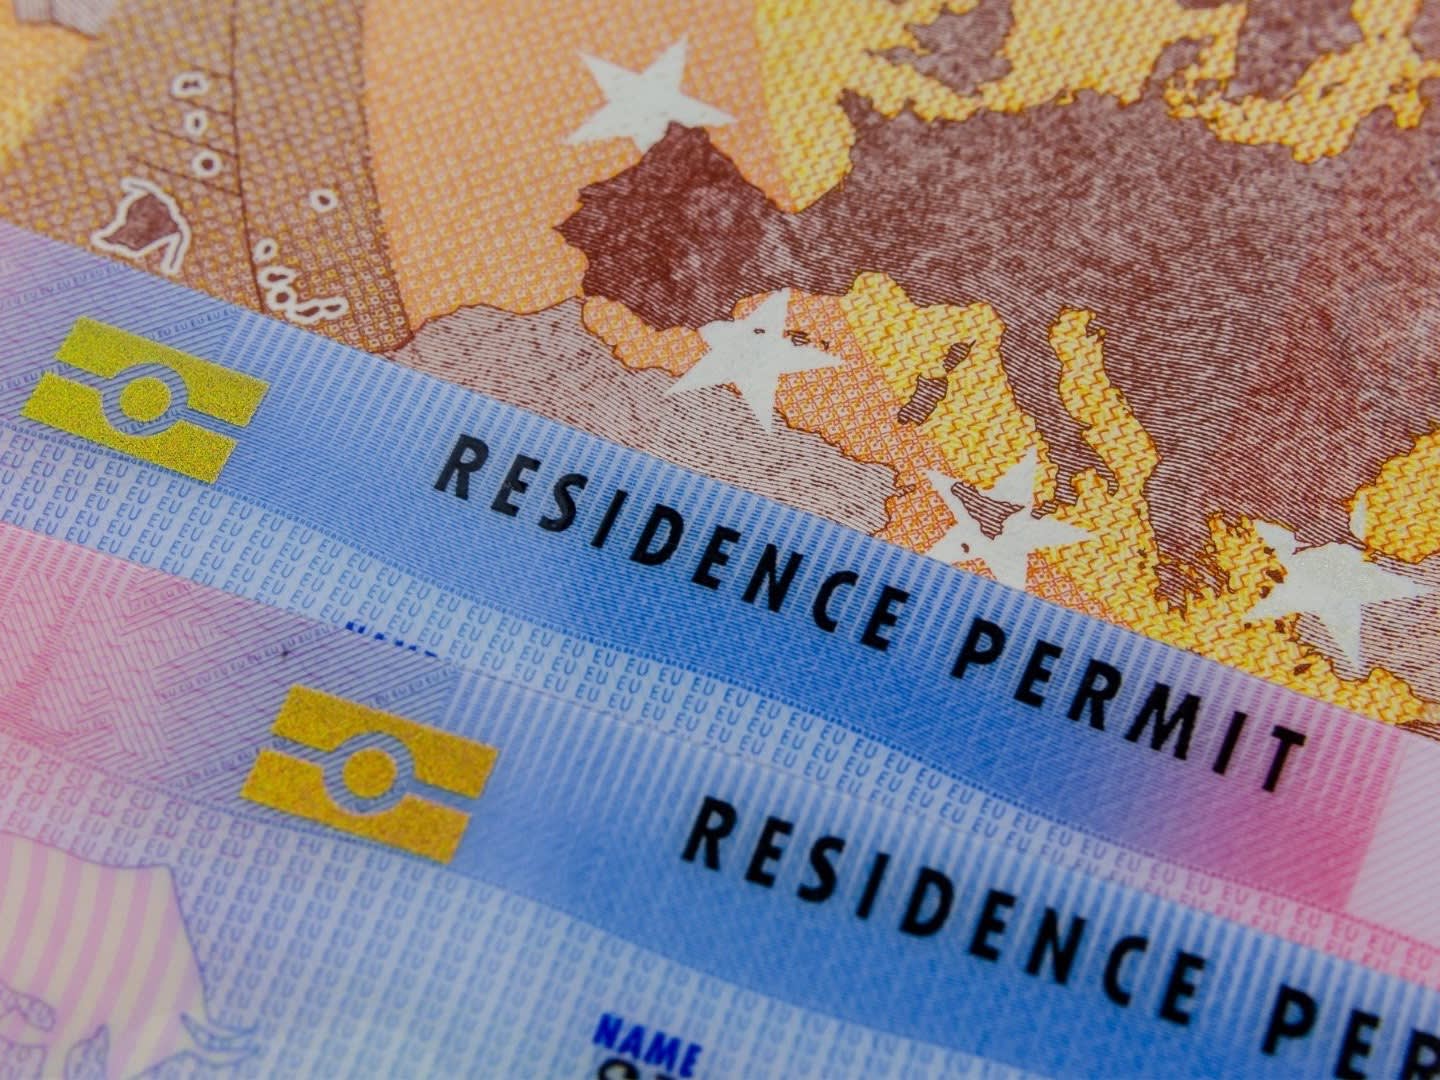 How to get your Belgium residence permit: An expat guide